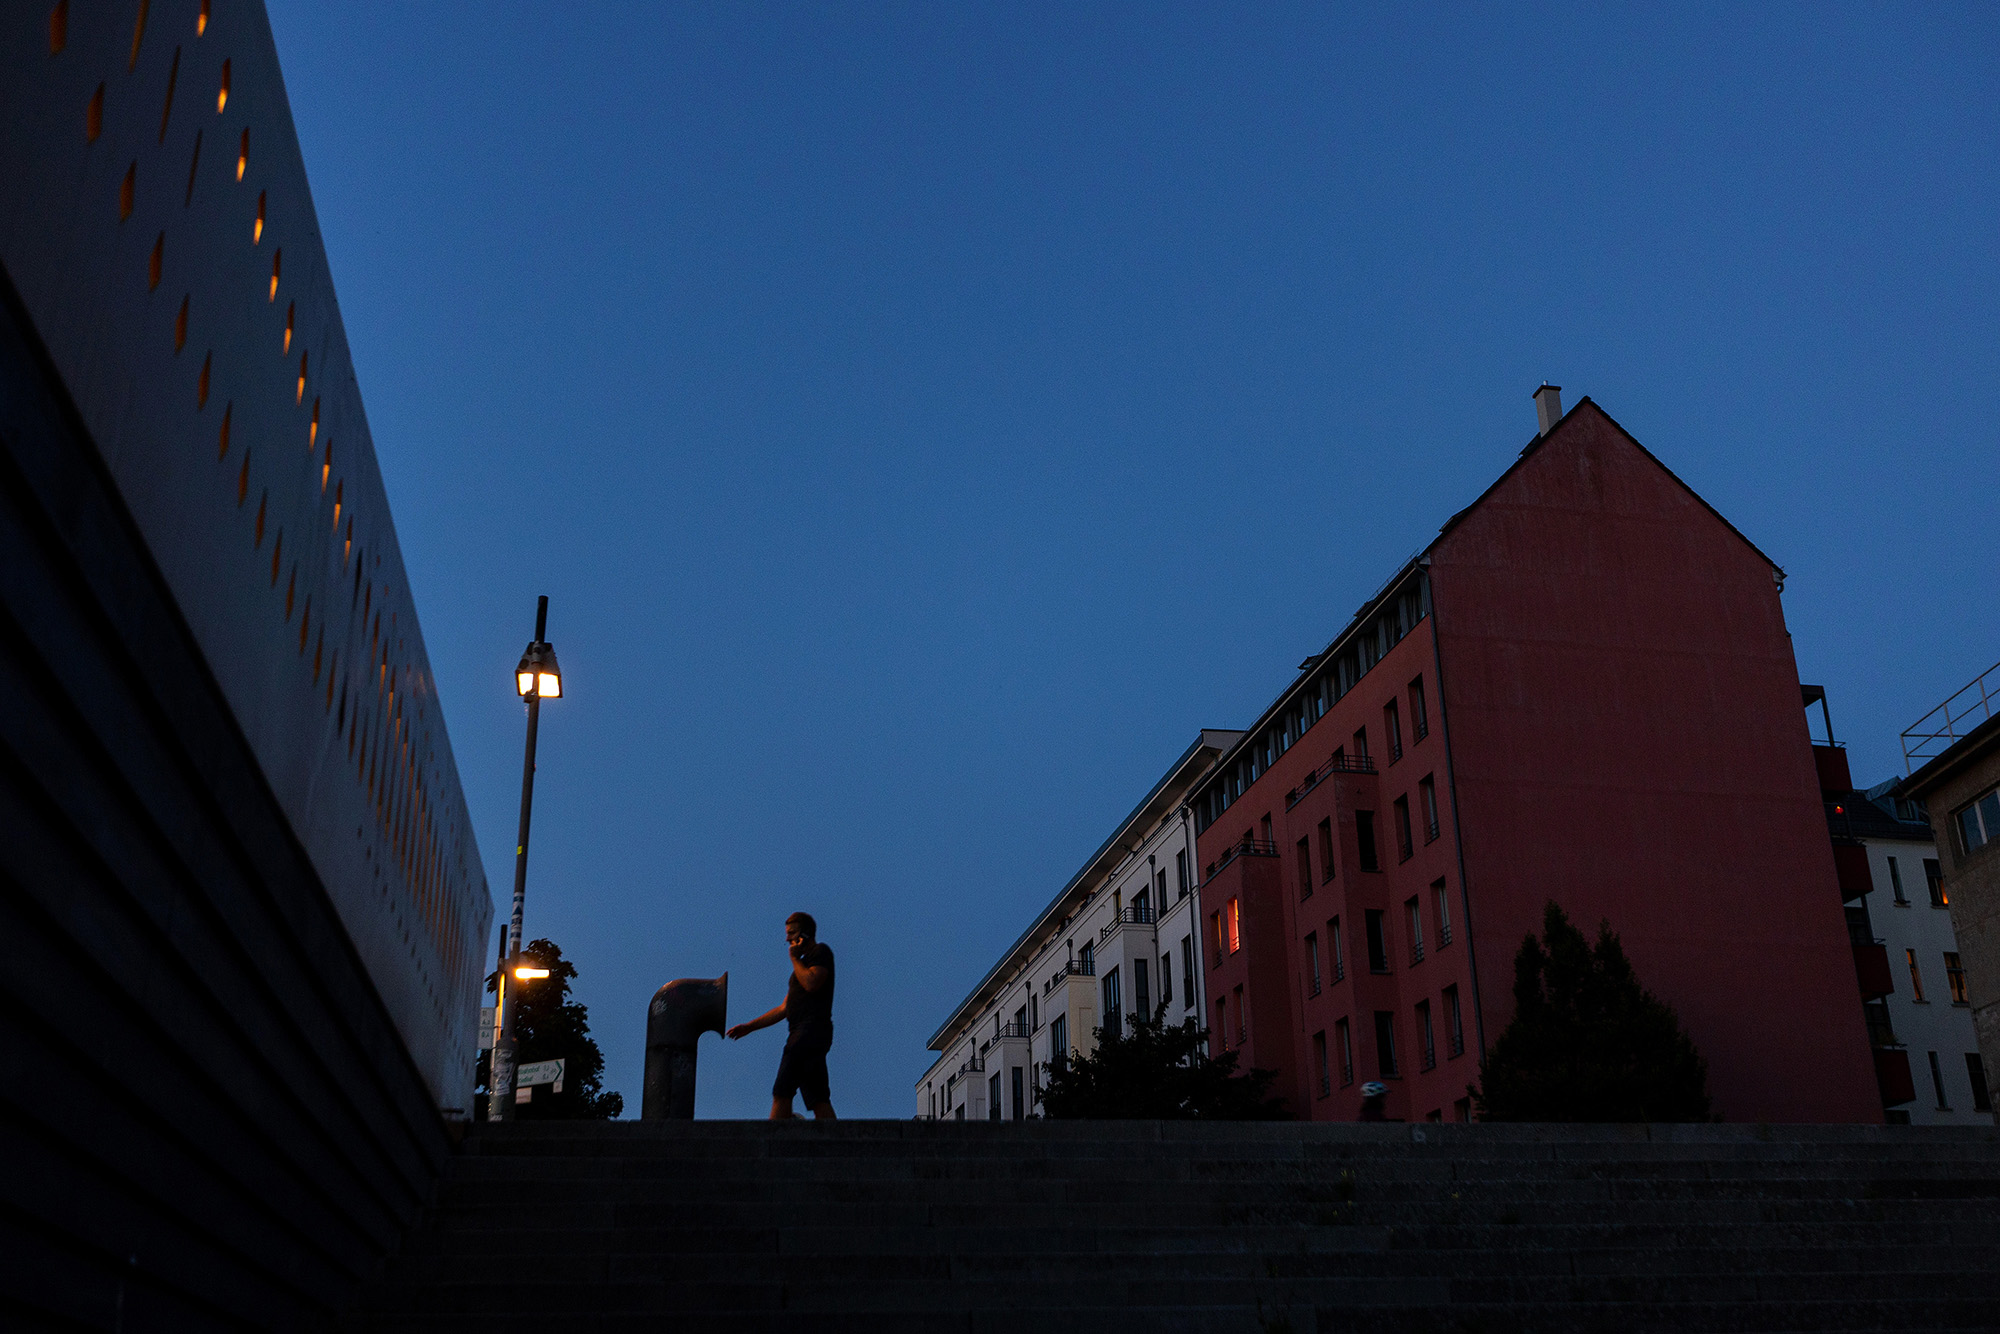 A street lamp illuminates a resident outside part of an apartment complex lit up at sunset in Berlin on Tuesday, August 16.